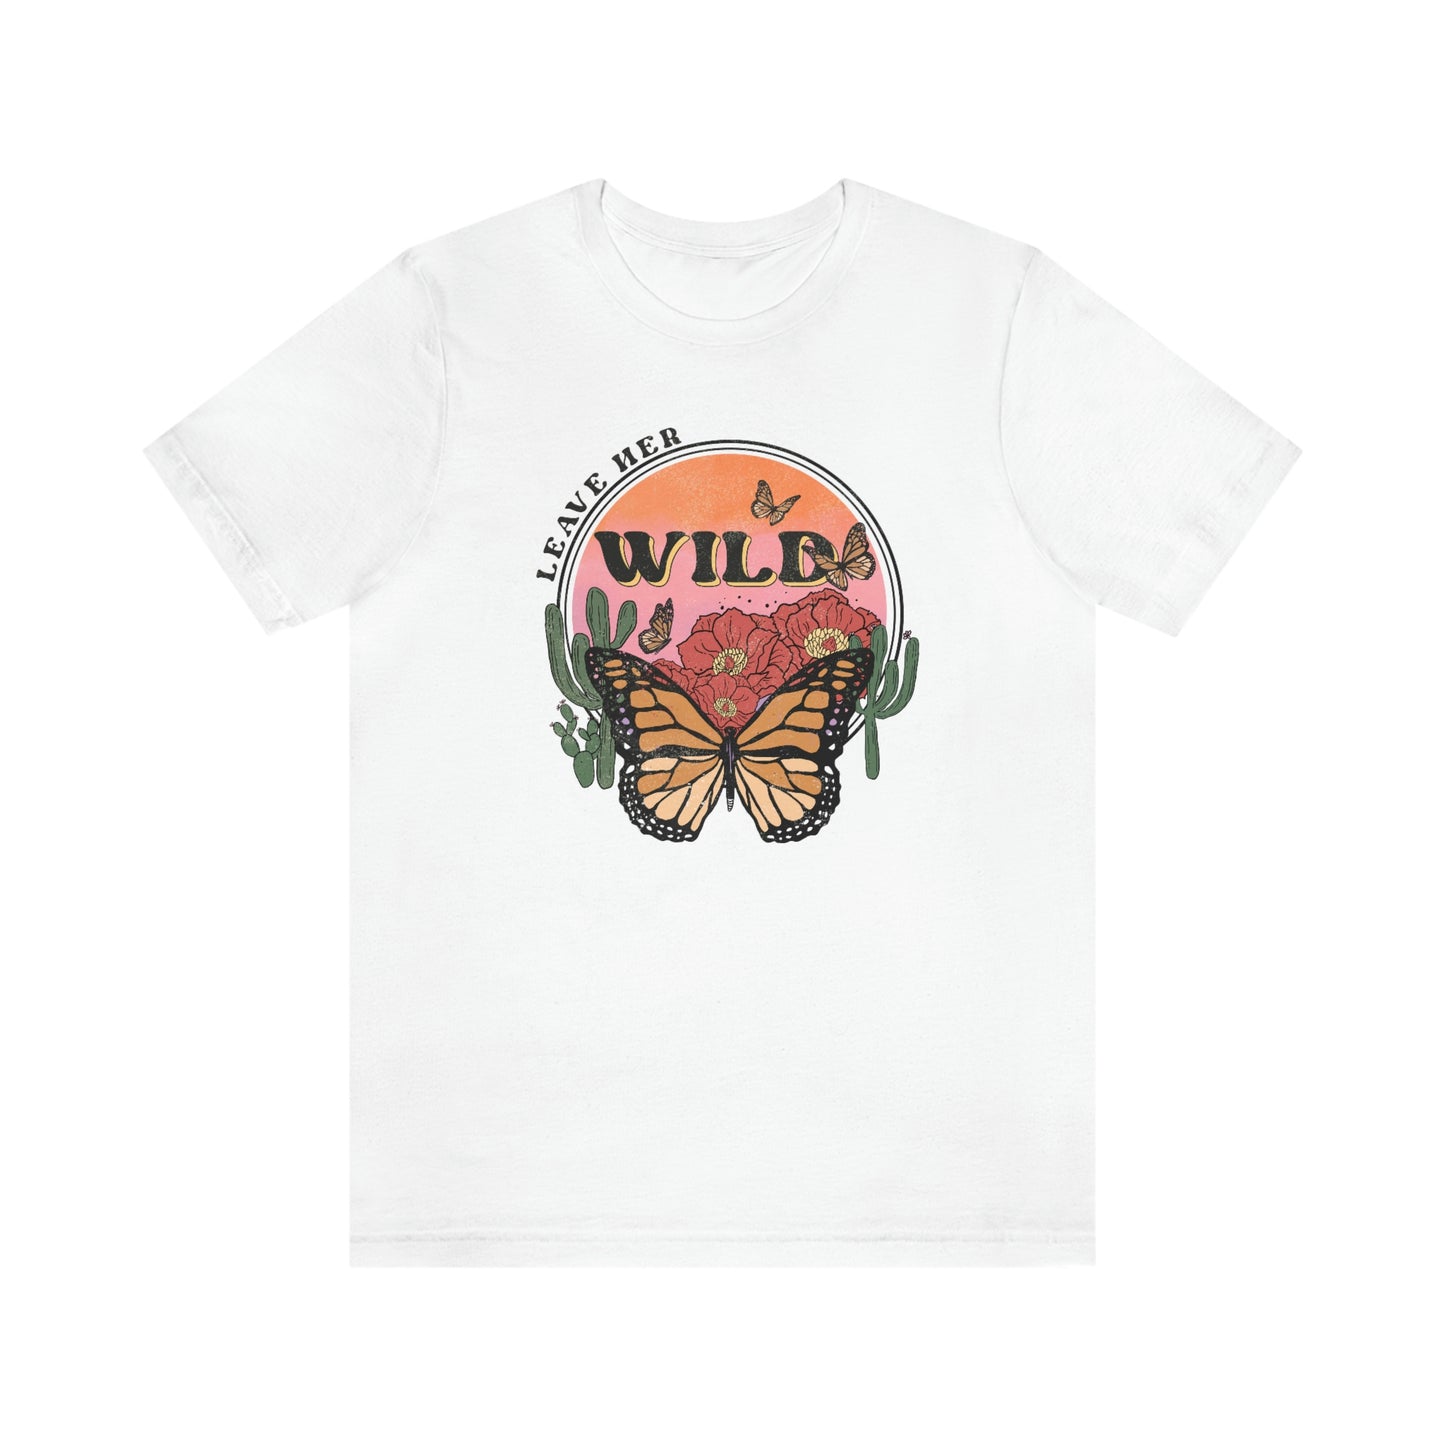 Leave Her Wild T-Shirt